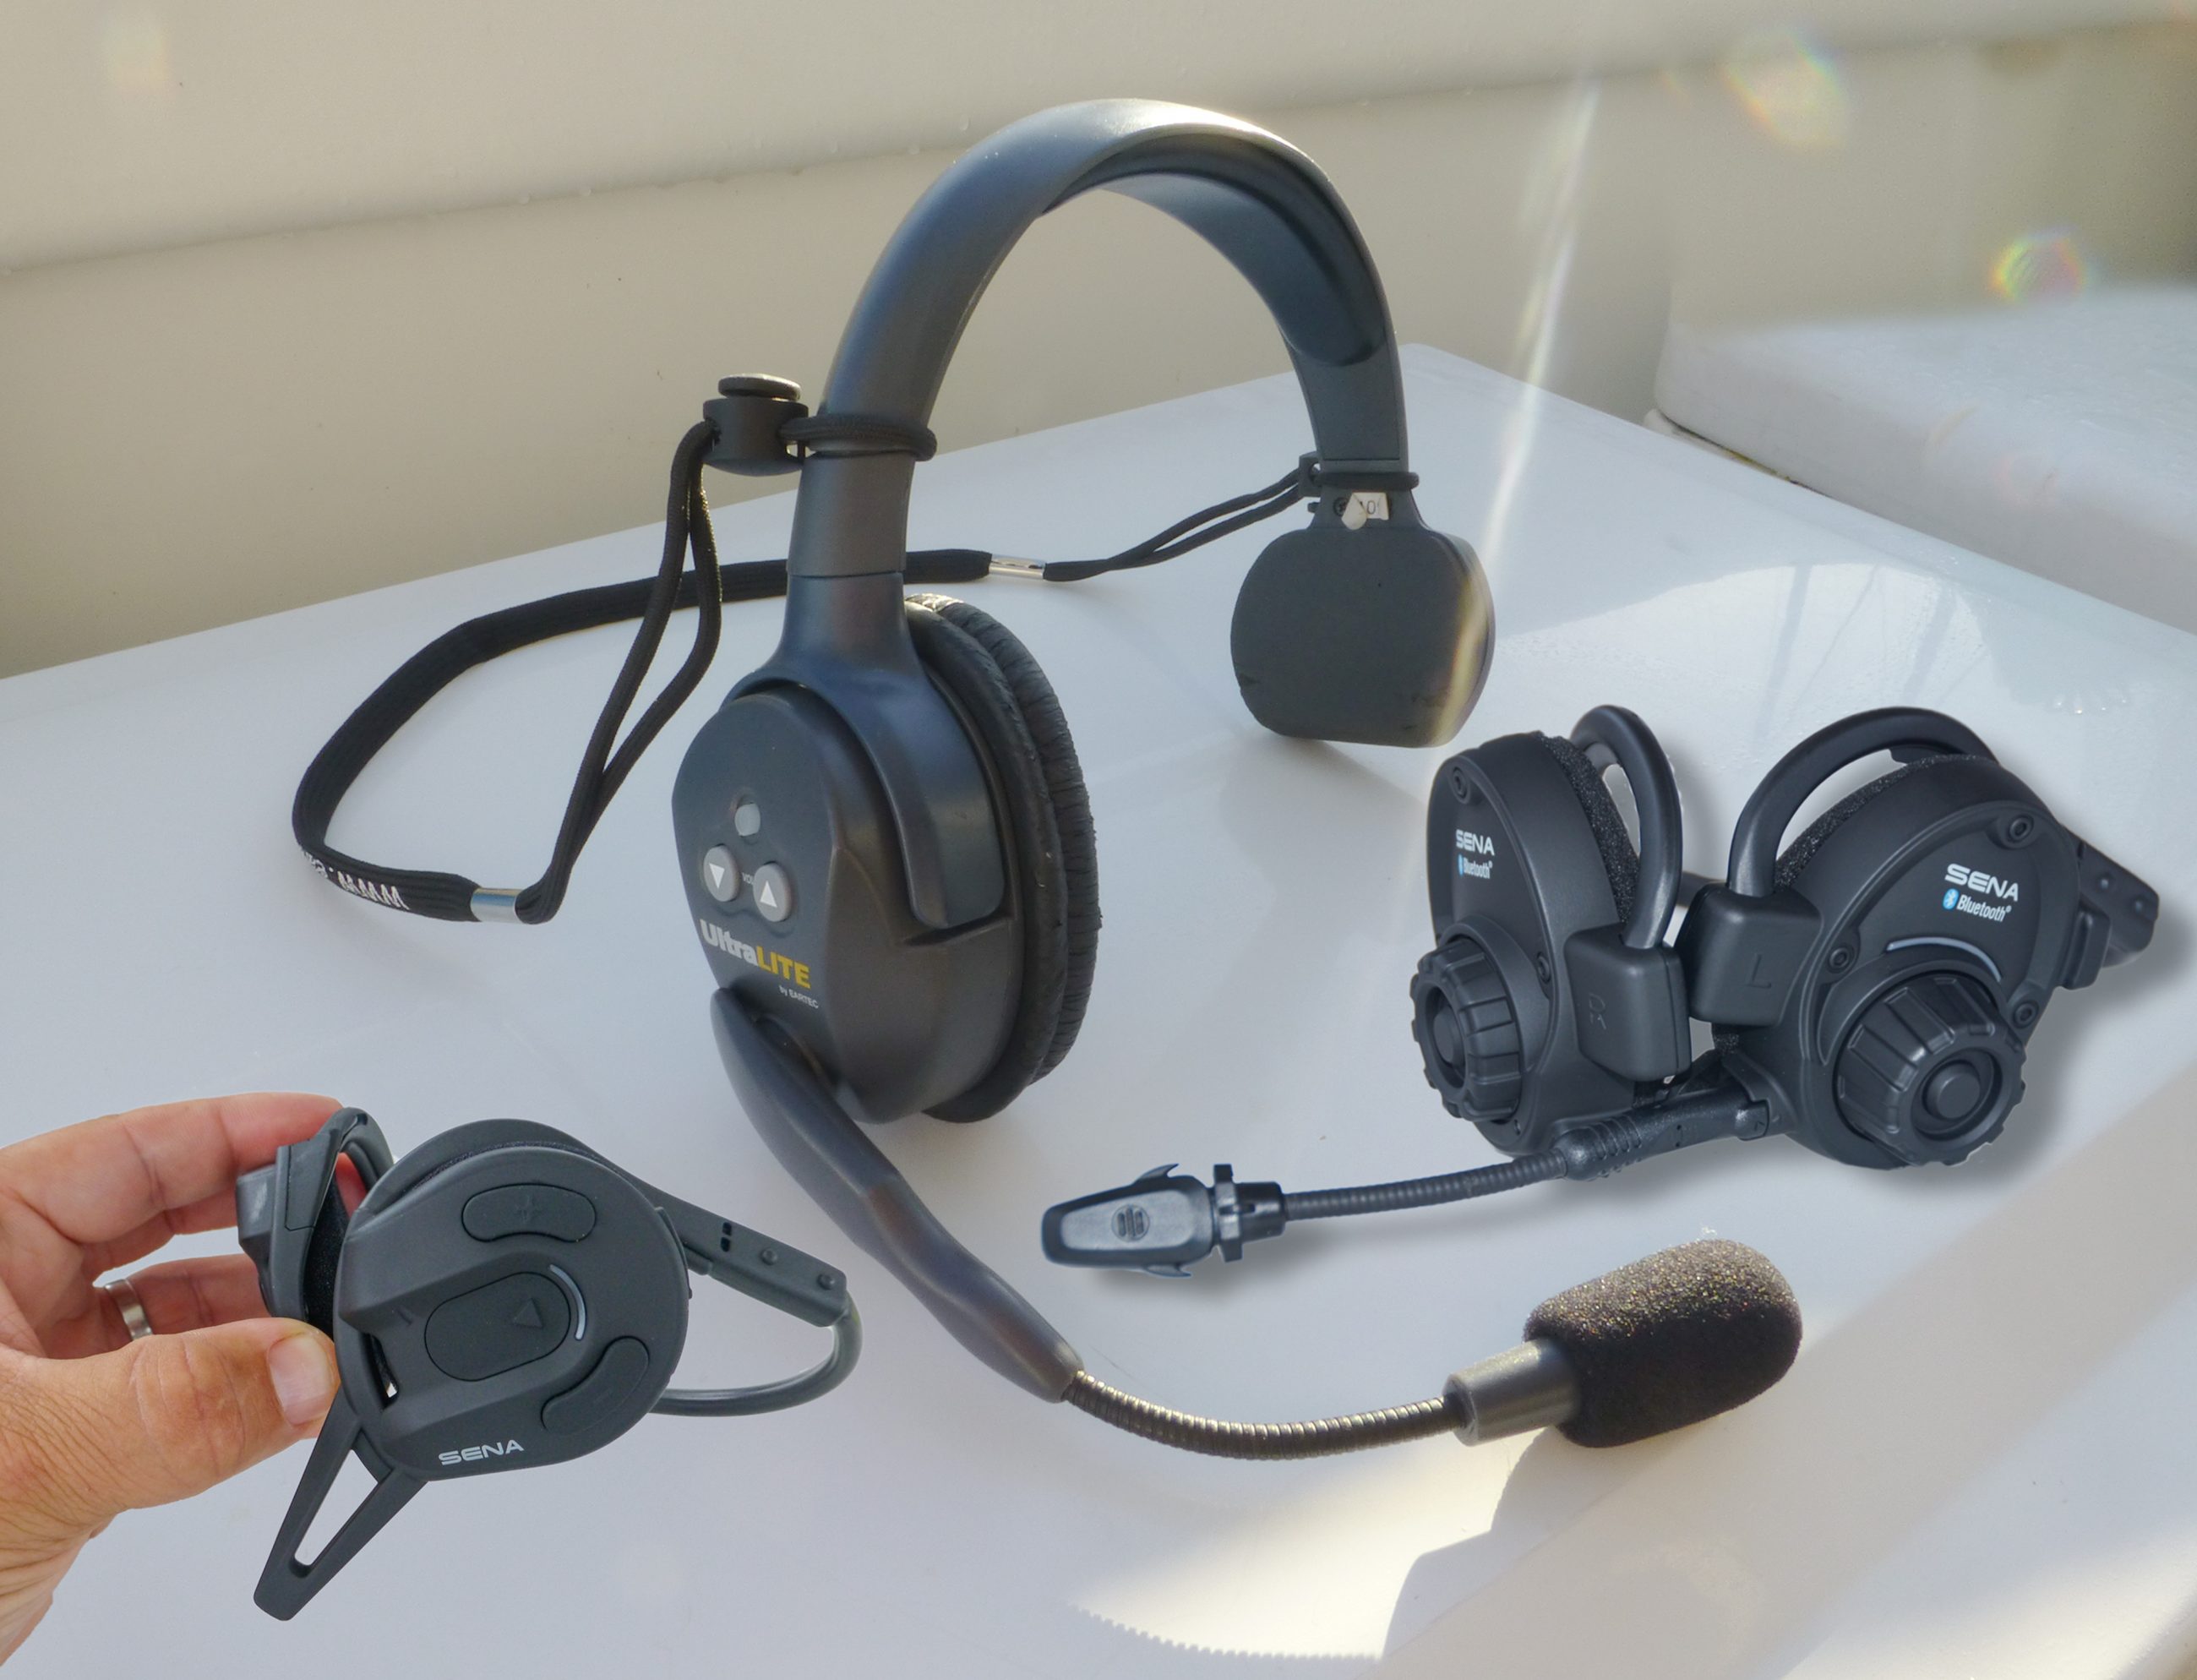 Full duplex wireless headsets, truly marriage savers - Panbo